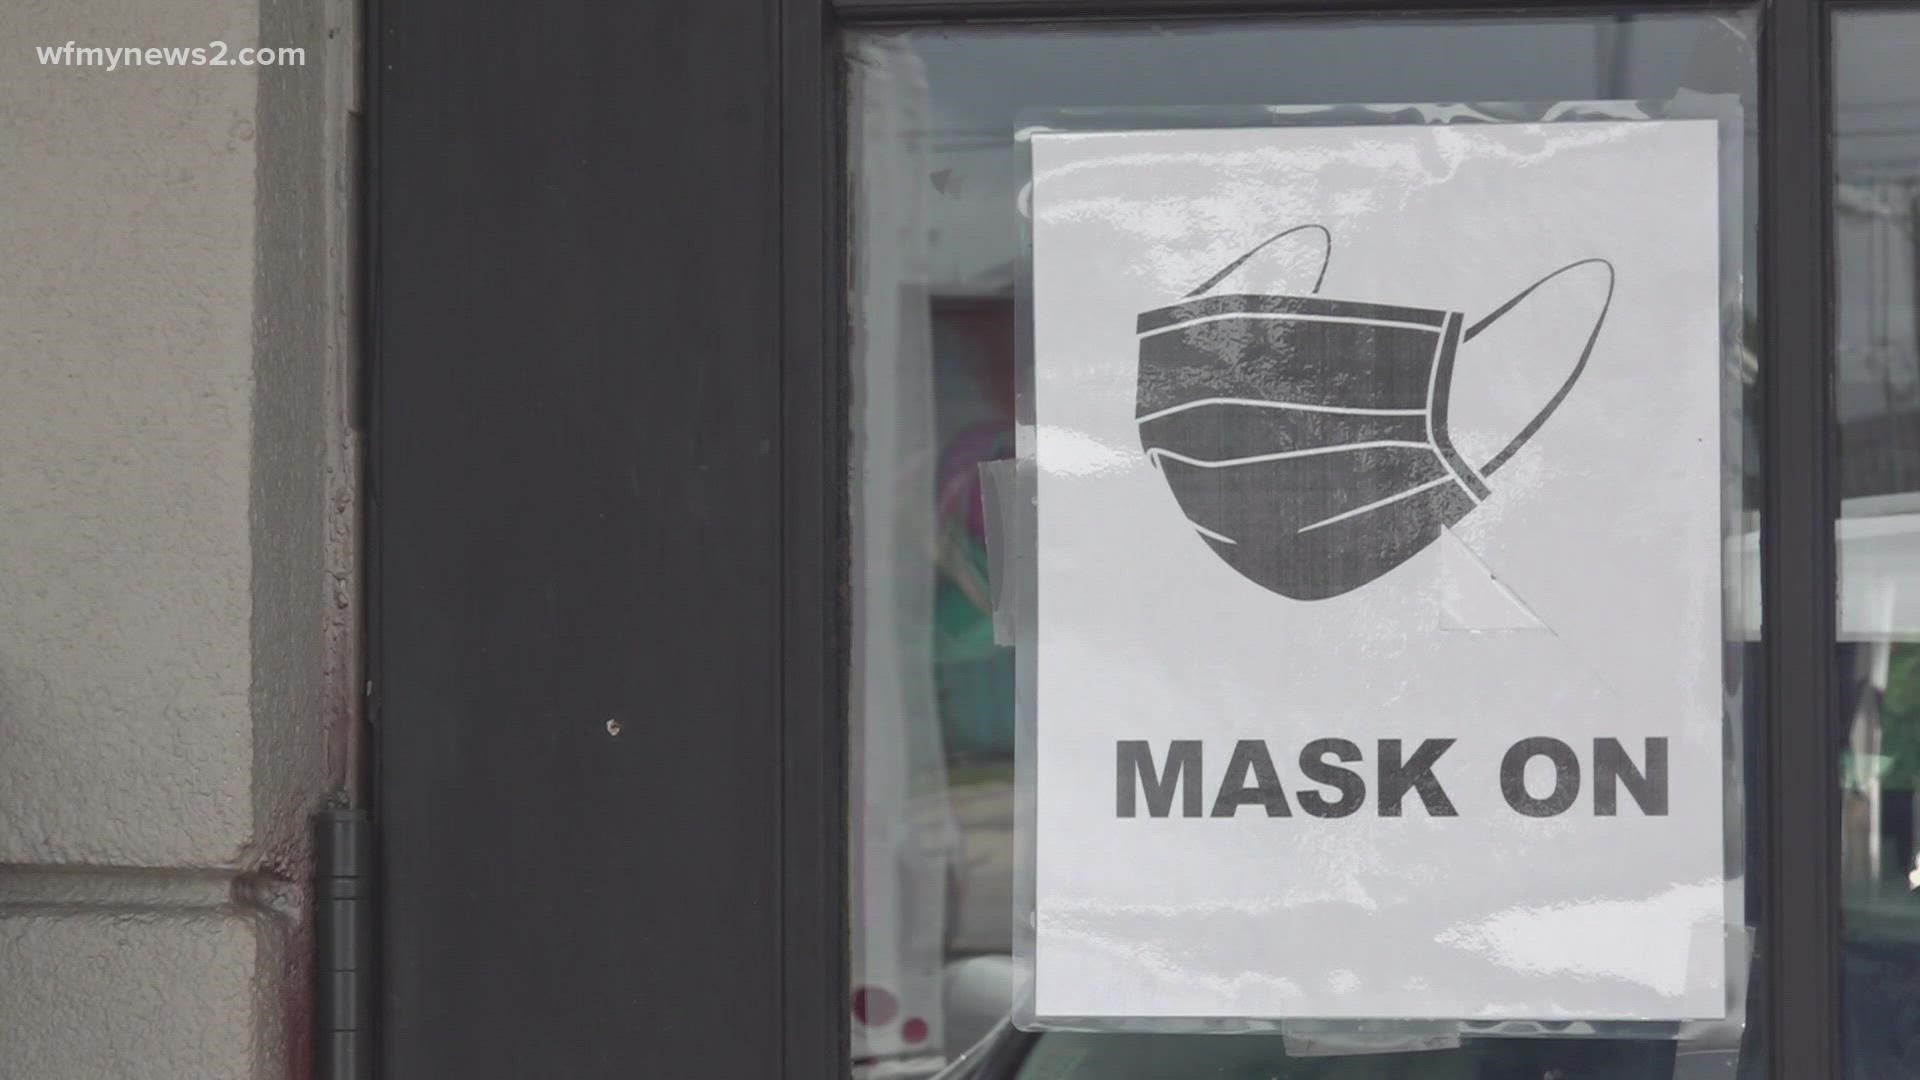 The county's mask mandate took effect Friday. Businesses had the weekend to start adjusting to the new rule.